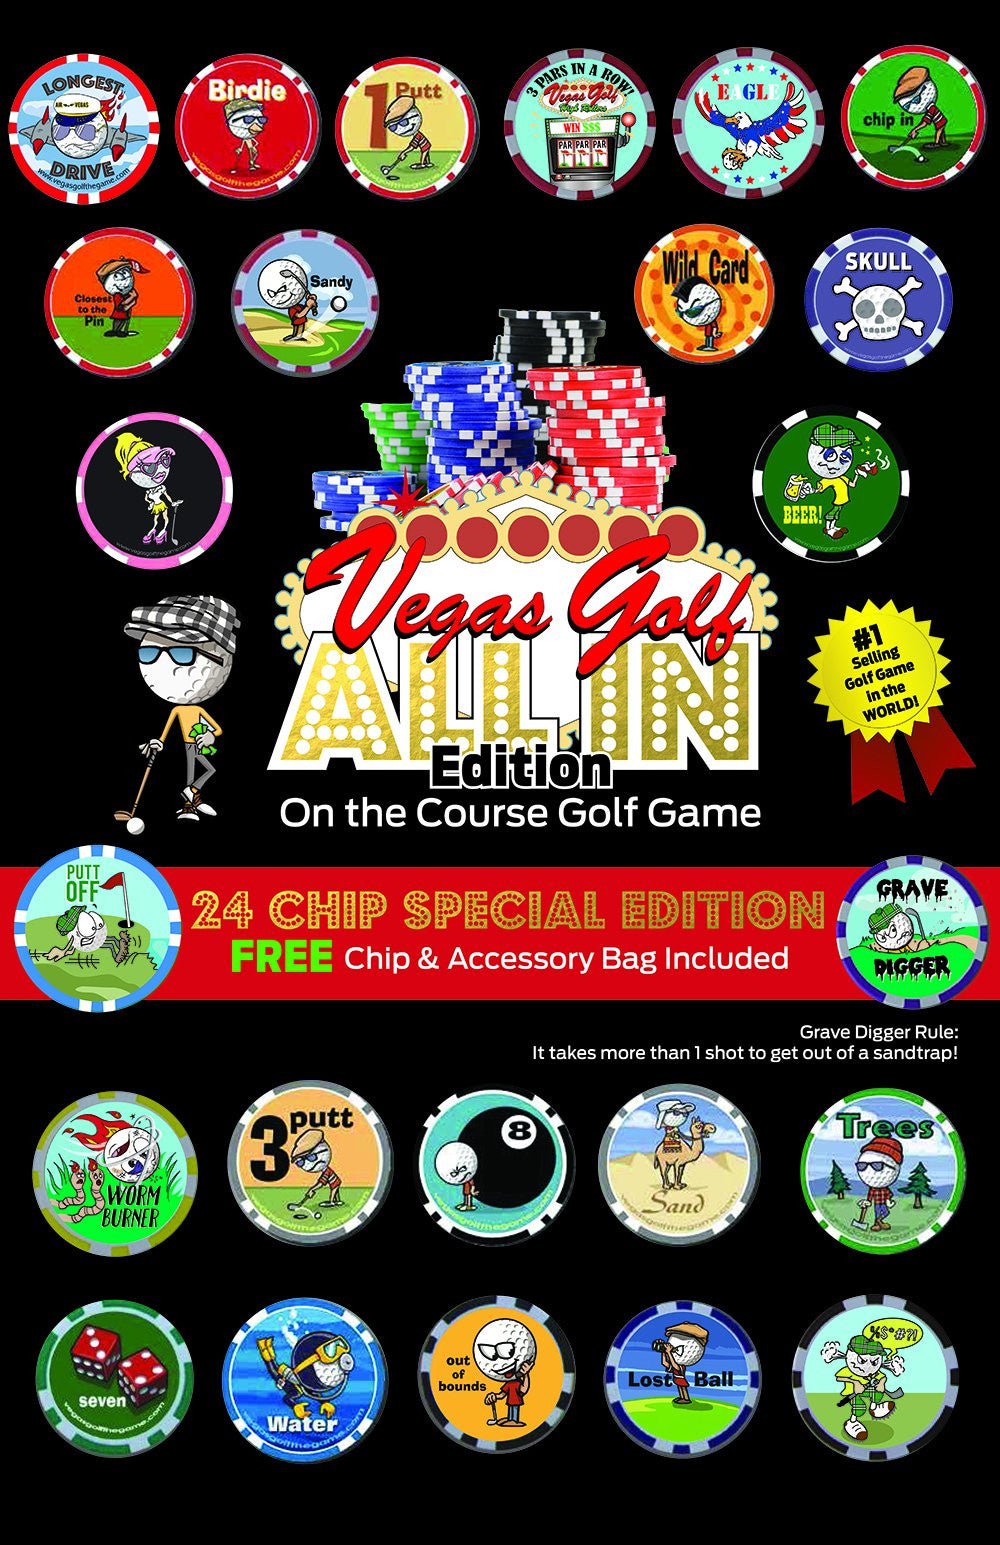 Vegas Golf Poker Chip "On The Course" Gambling Game